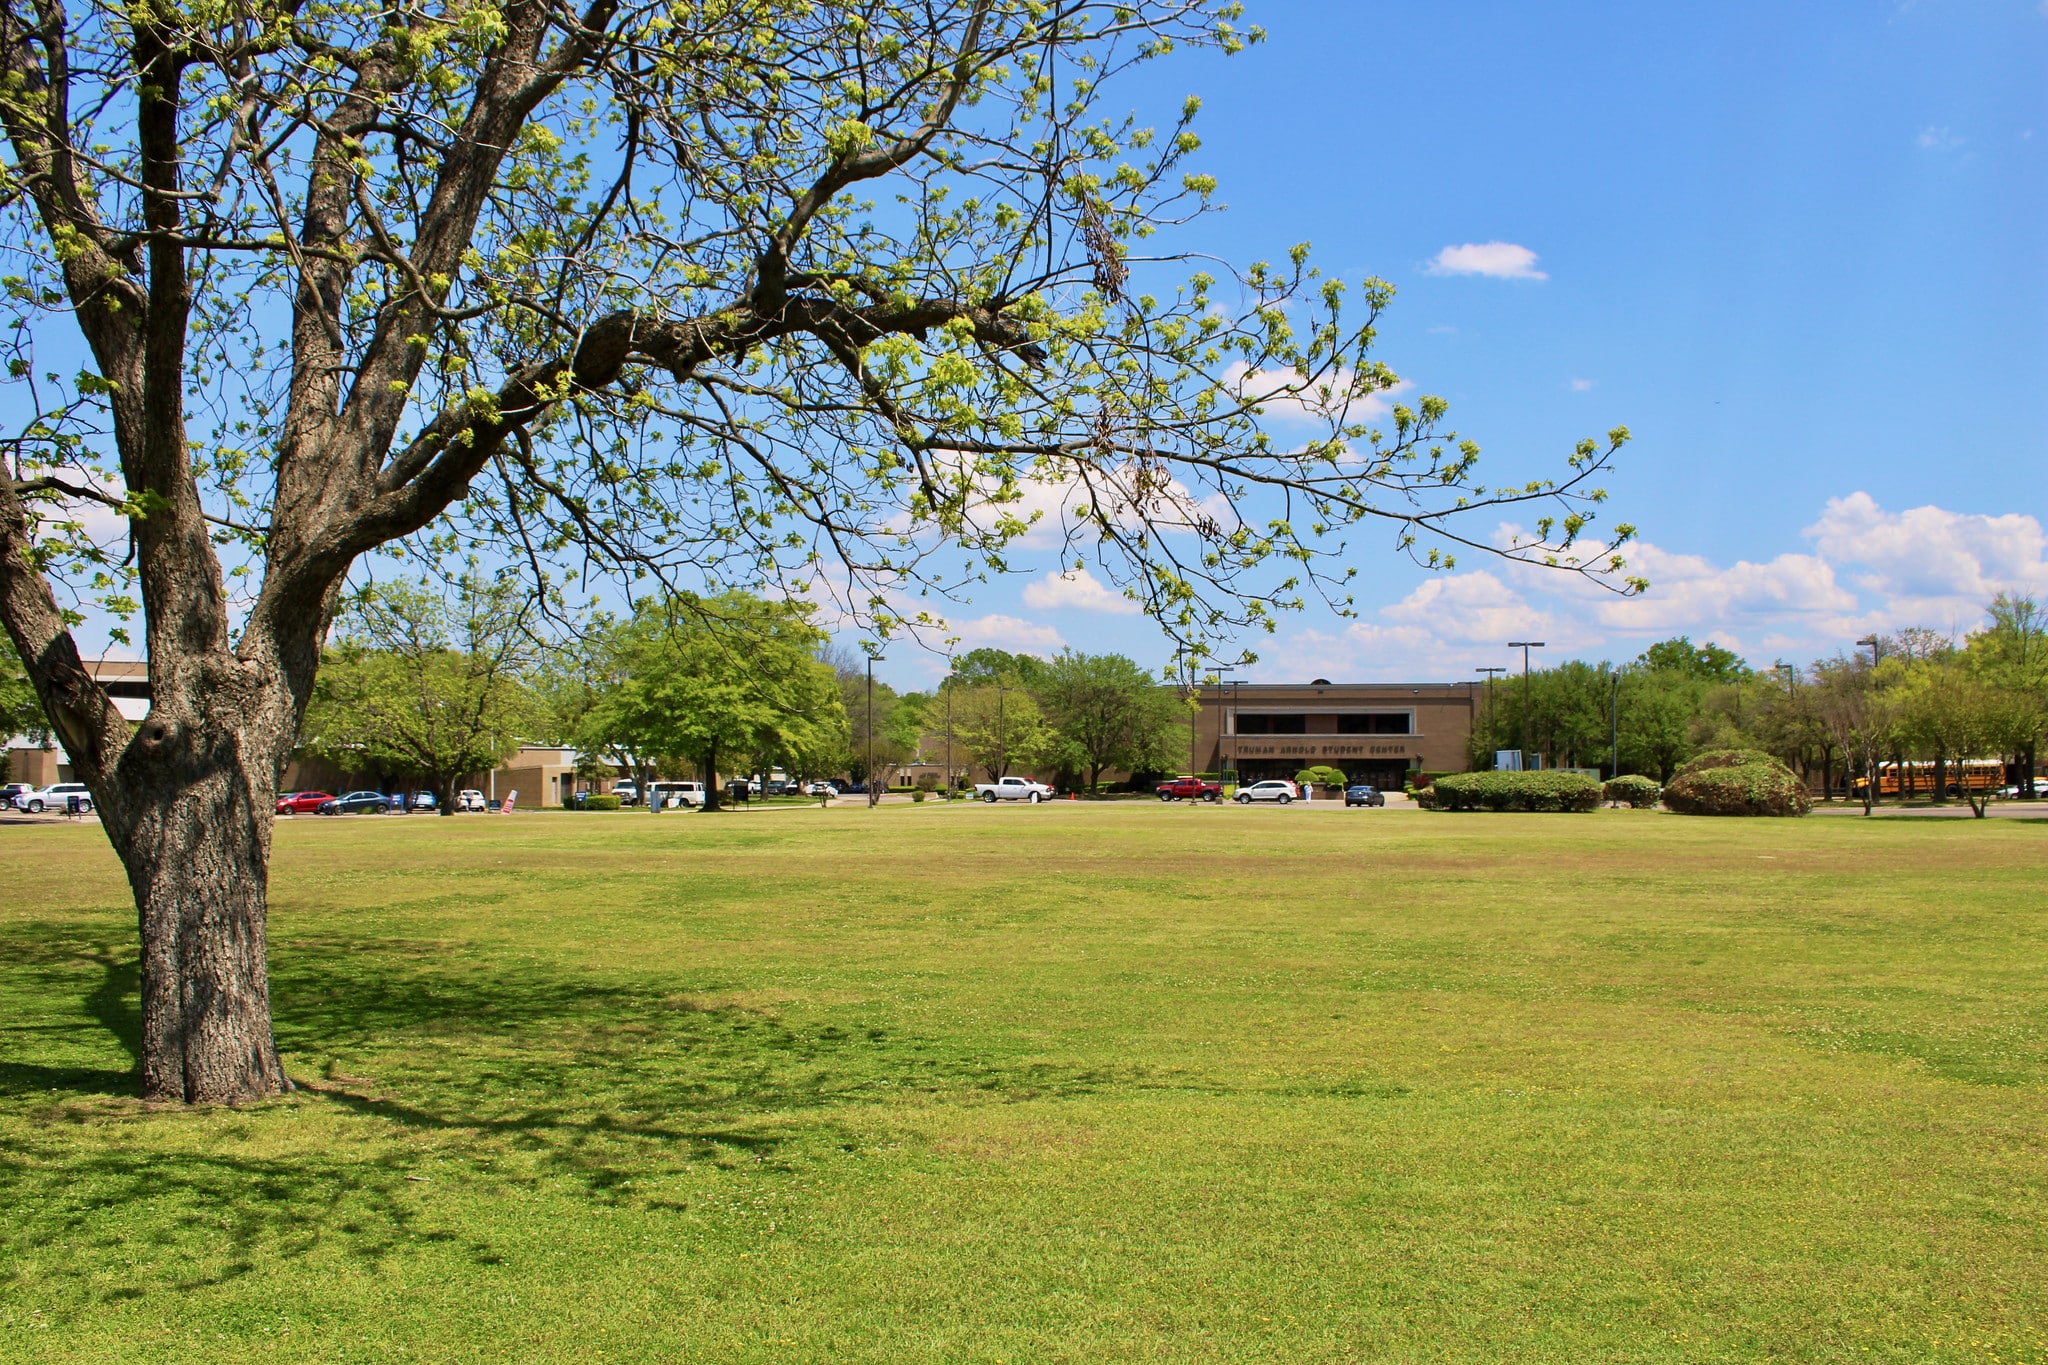 Campus green in spring